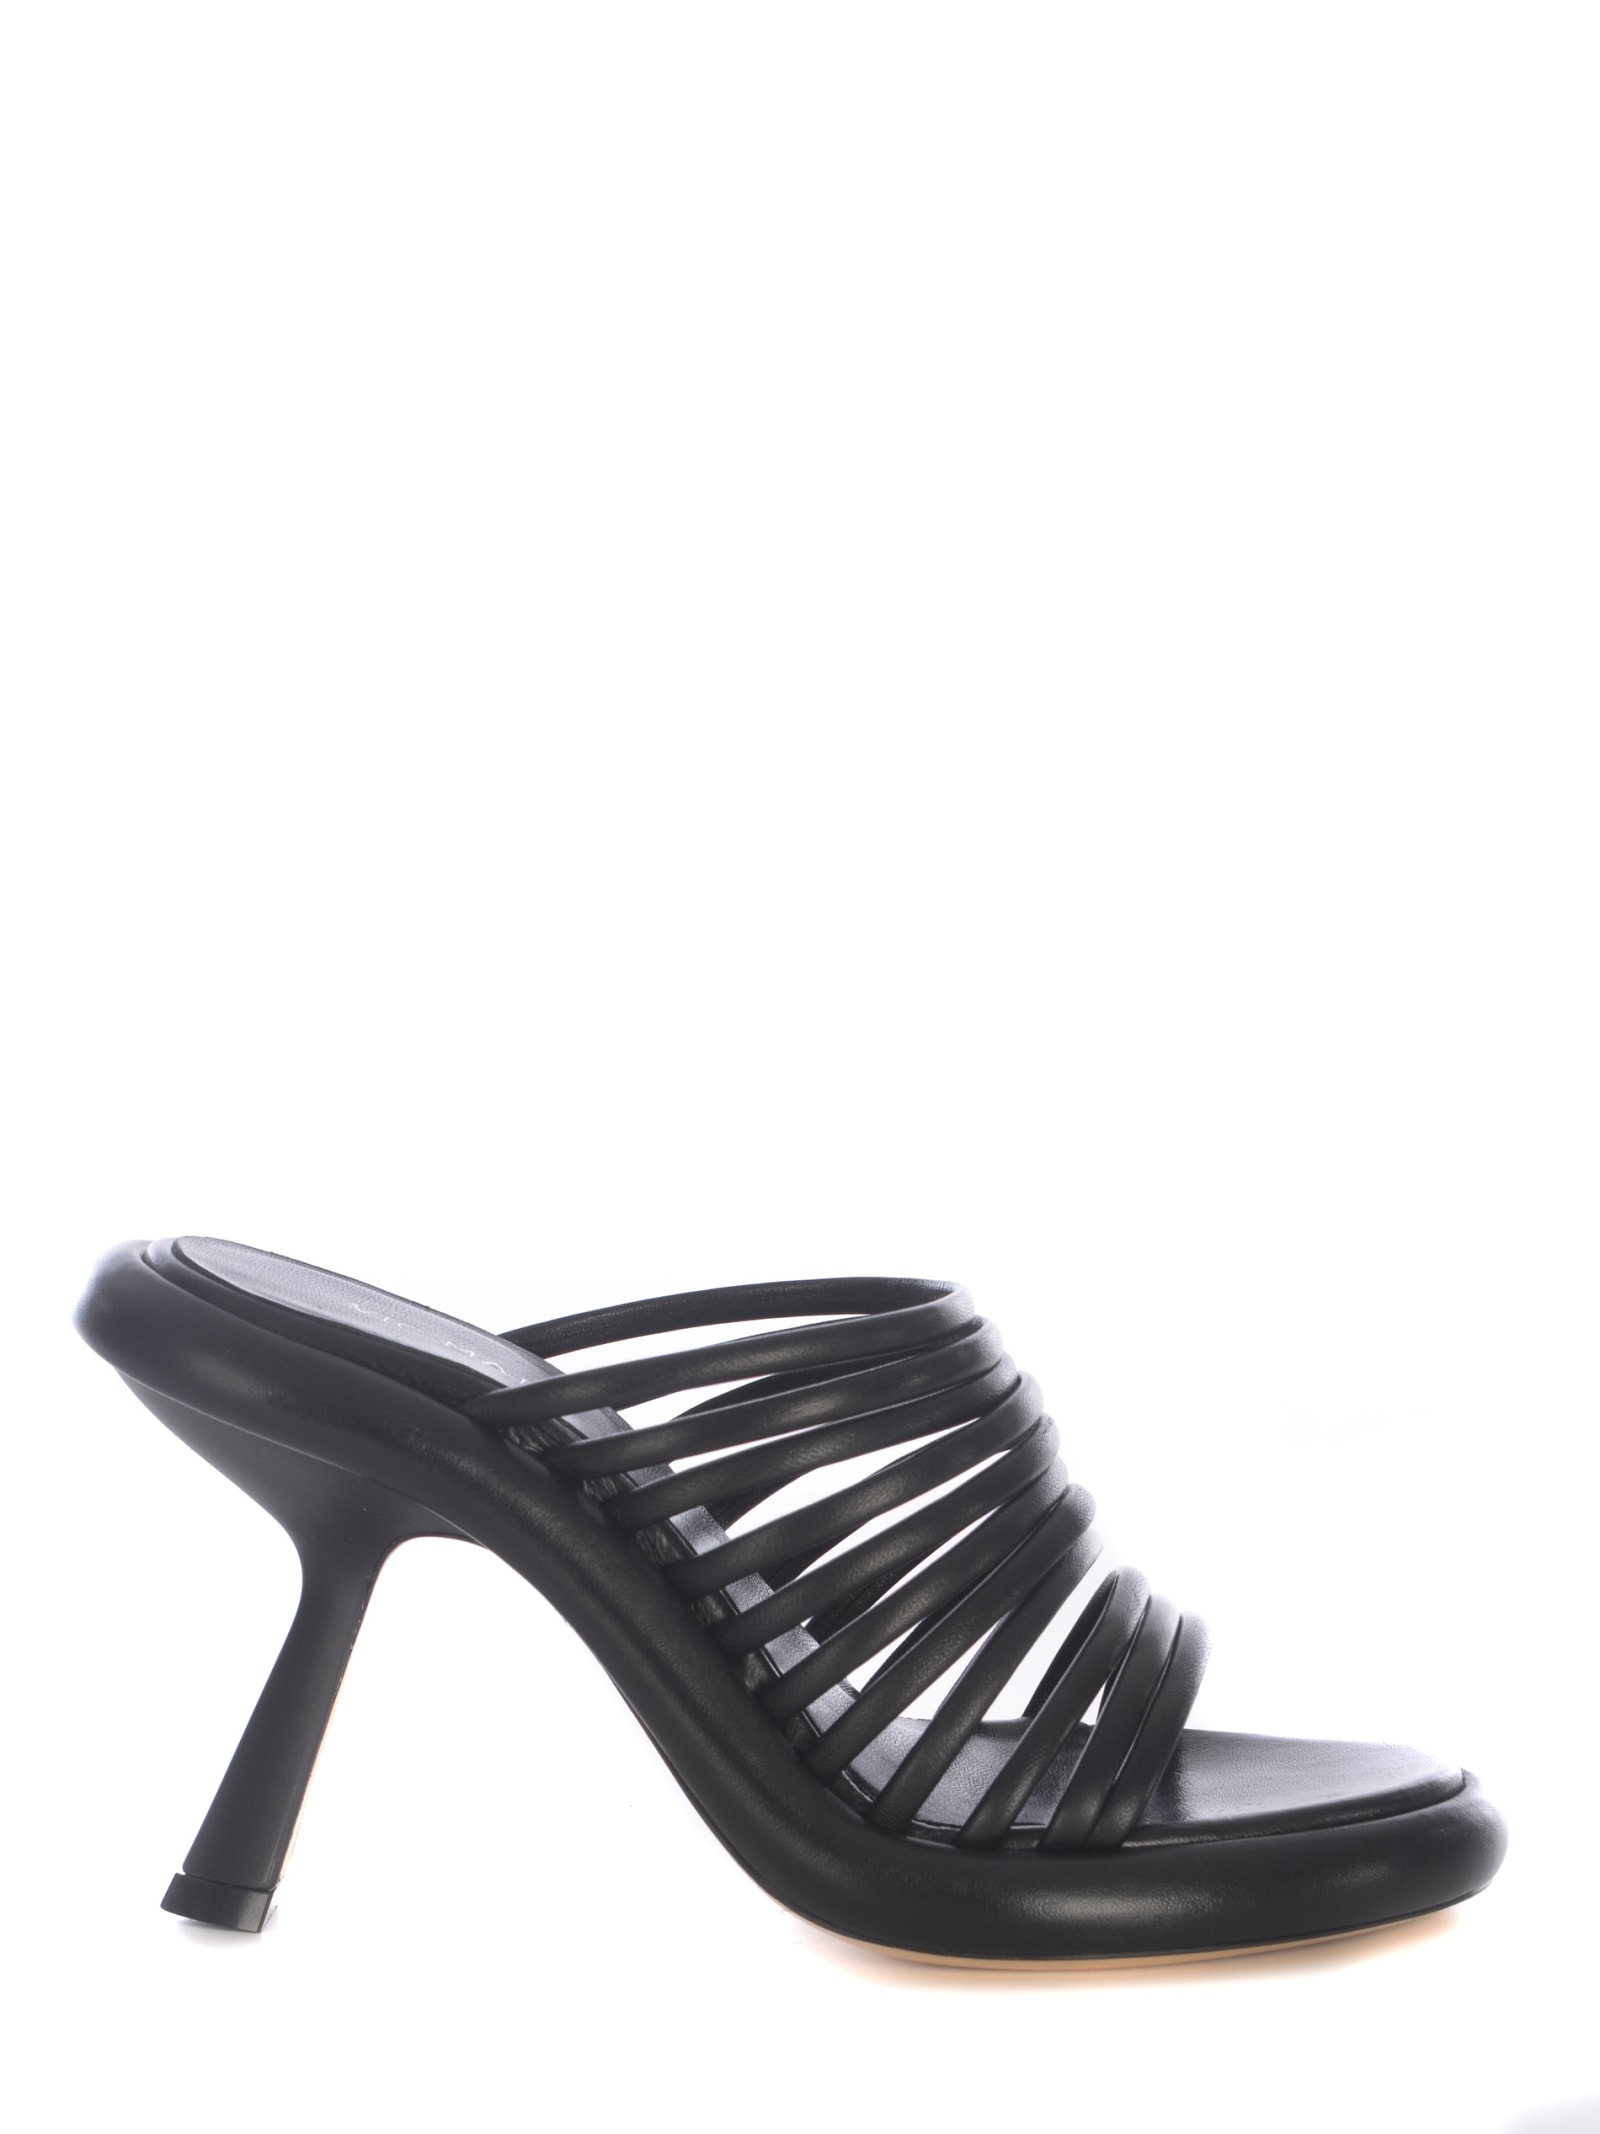 Shop Vic Matie Sandal Vic Matié Dosh Made Of Nappa In Nero